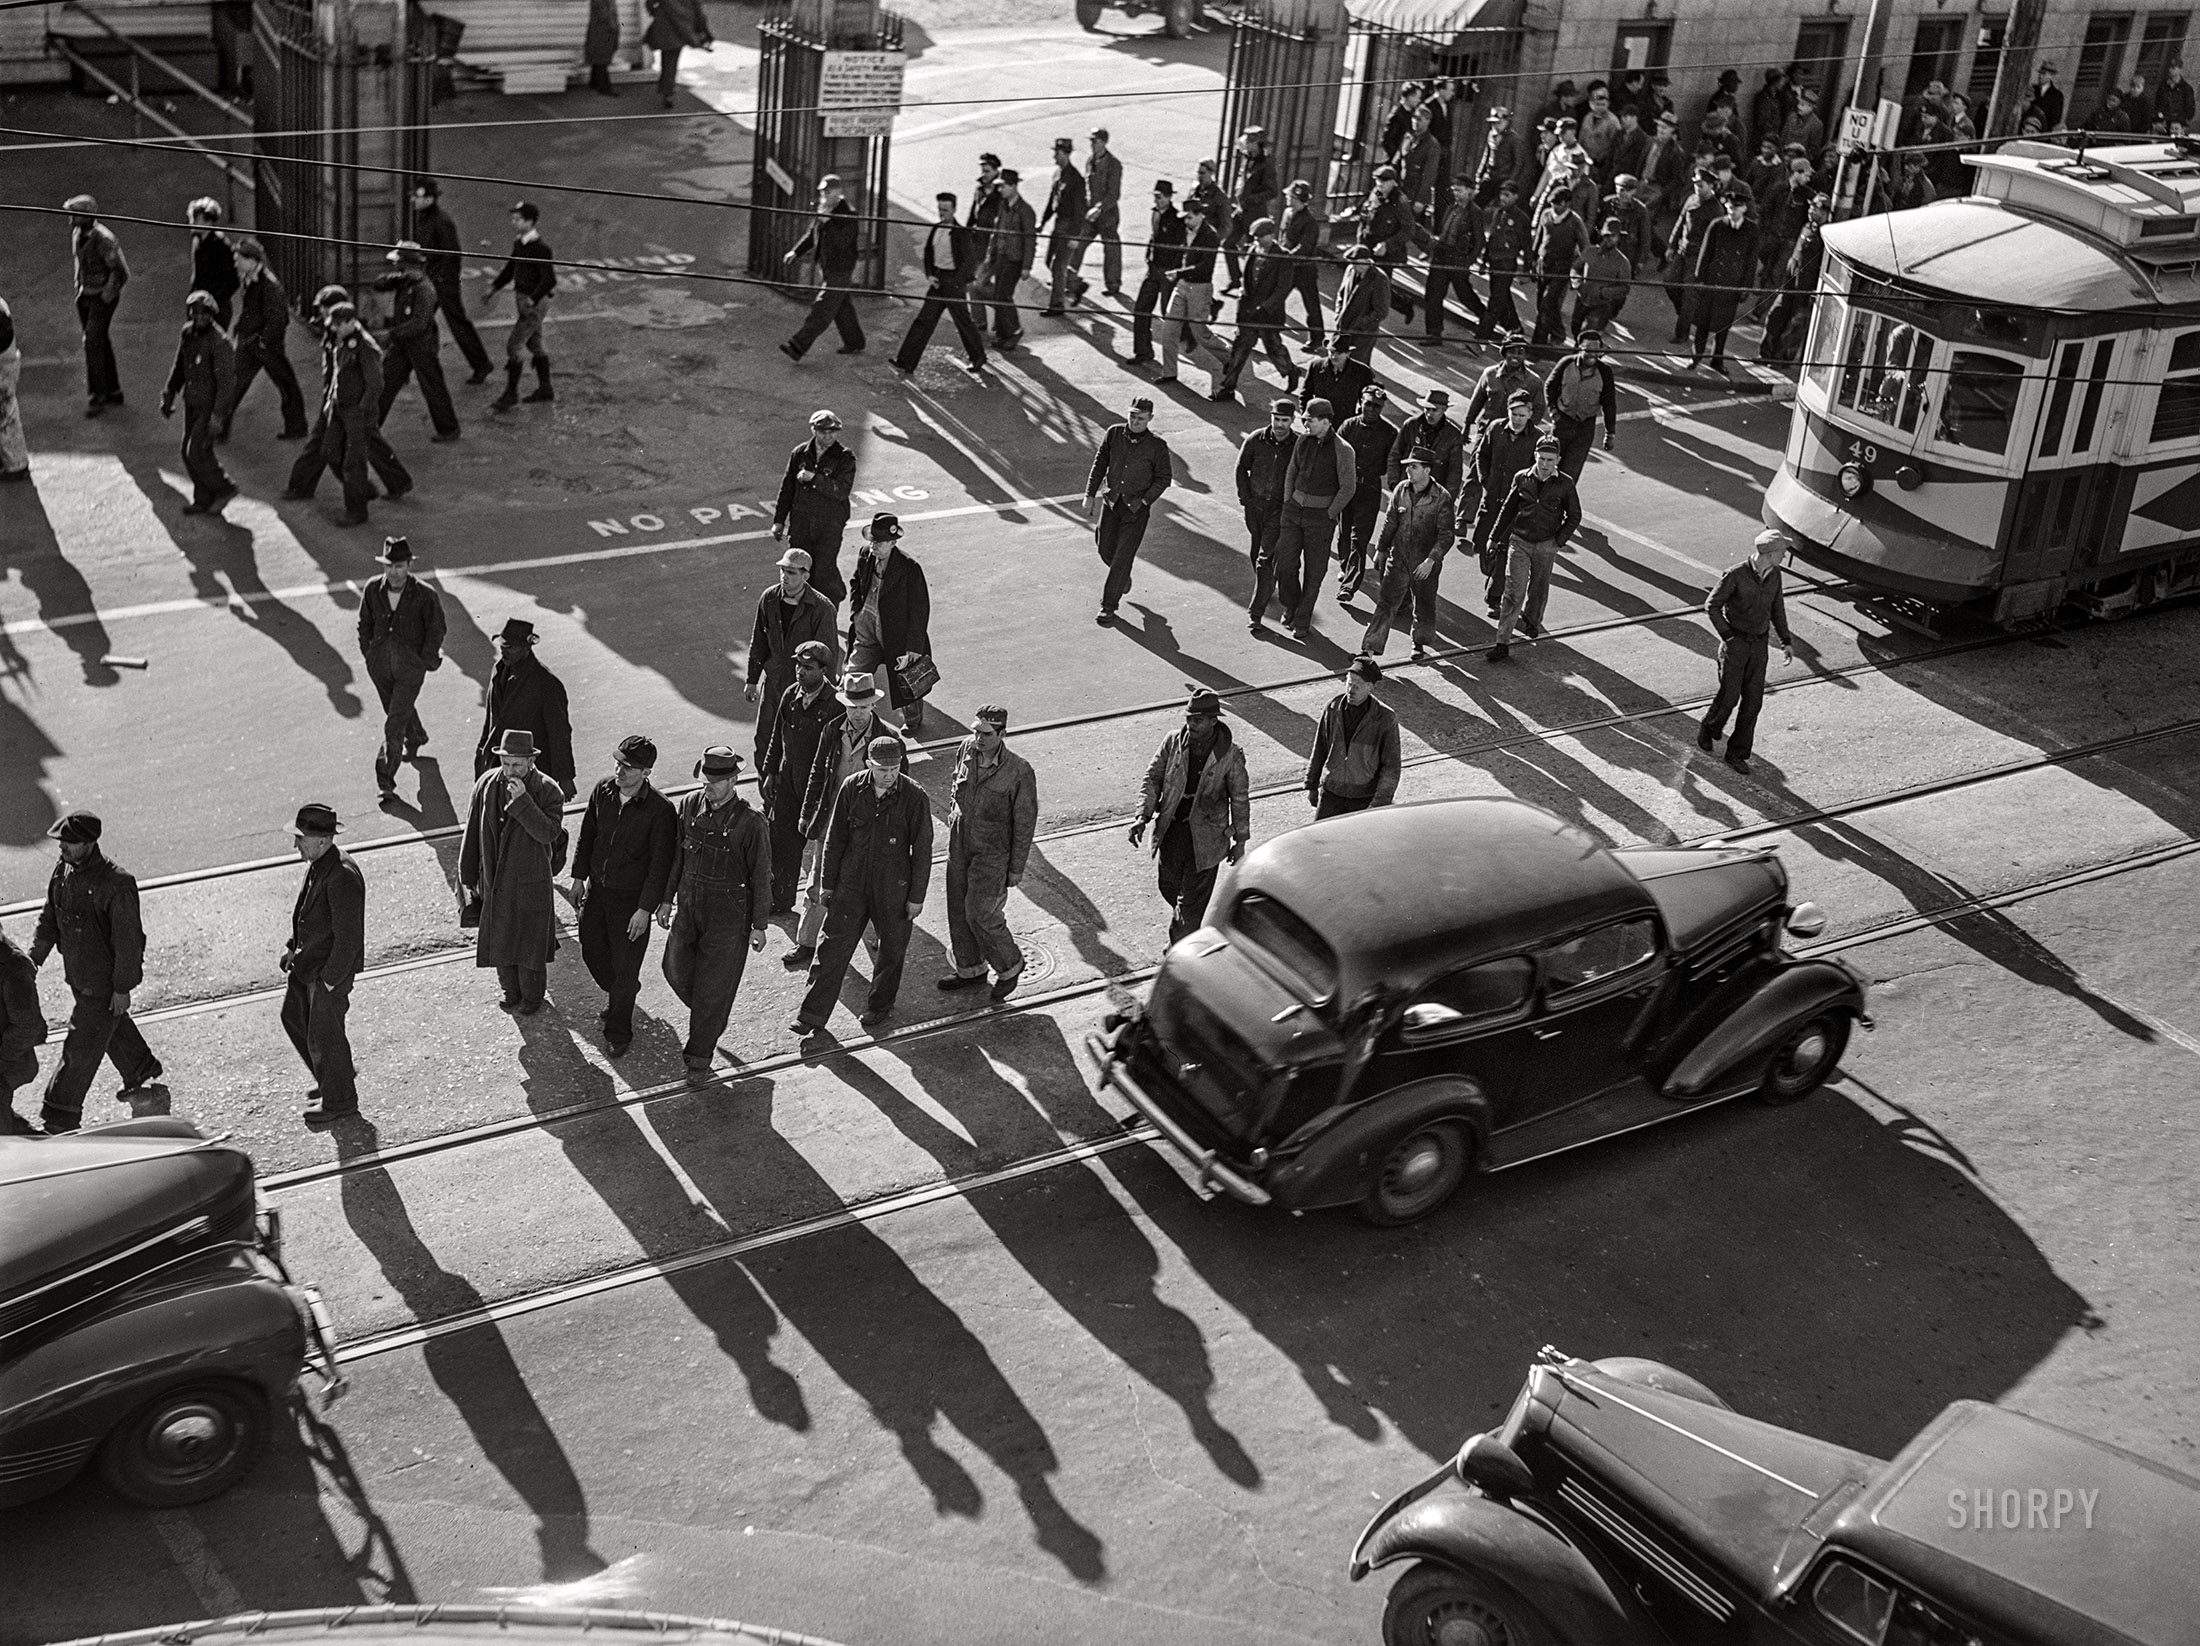 March 1941. "Newport News, Virginia. Shipyard employees getting out at 4 p.m." Medium format acetate negative by John Vachon. View full size.